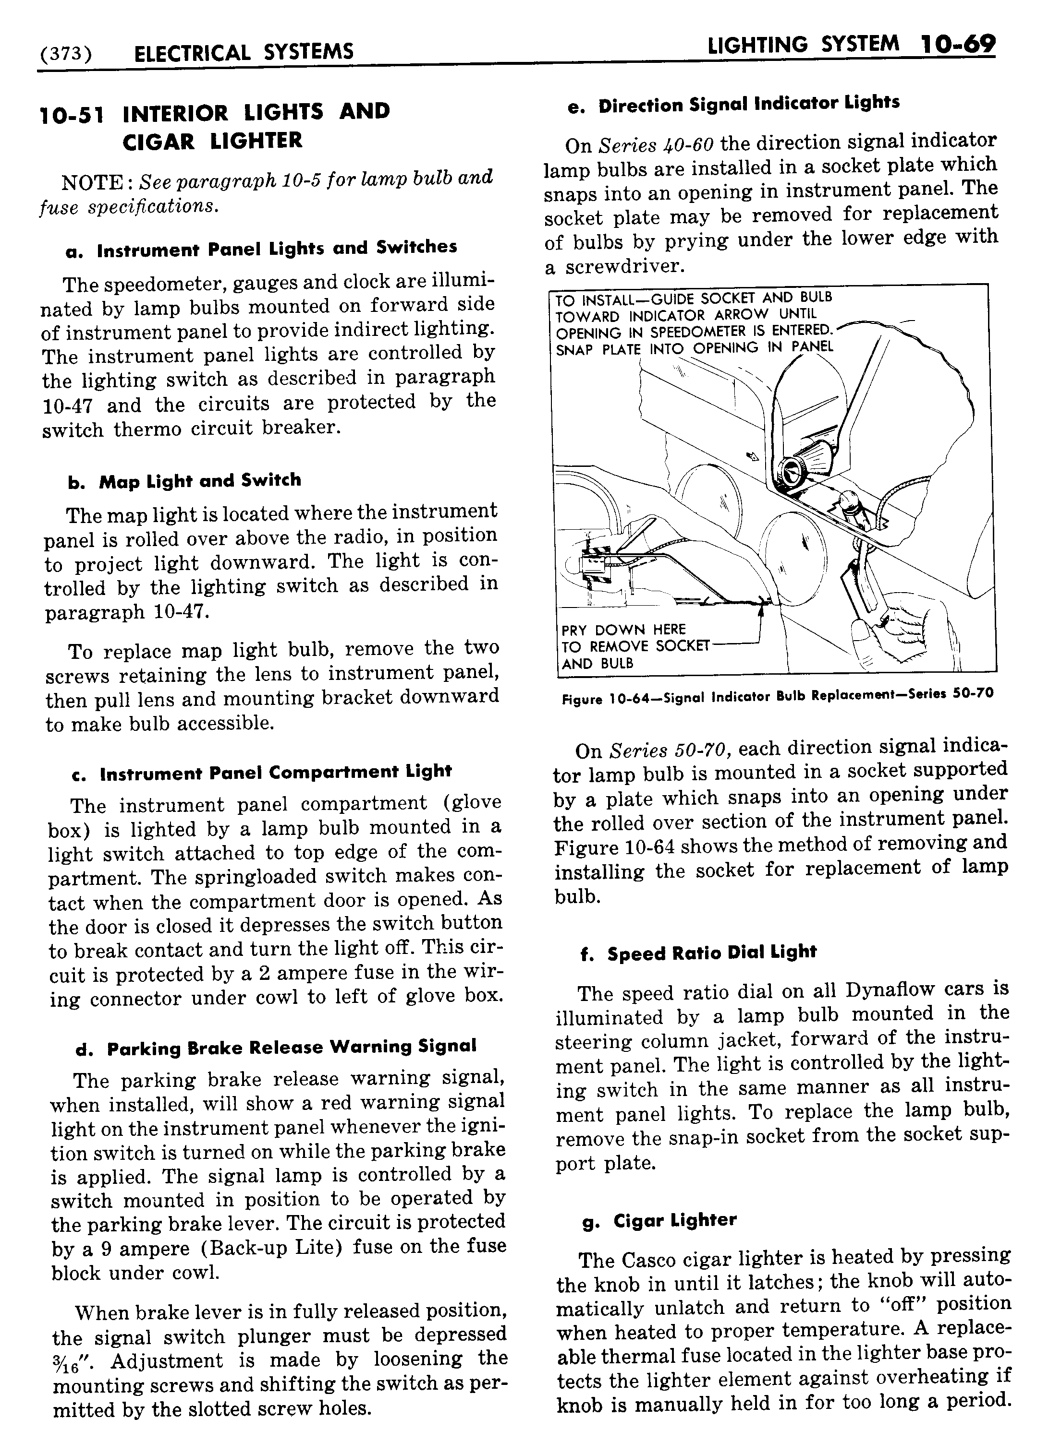 n_11 1955 Buick Shop Manual - Electrical Systems-069-069.jpg